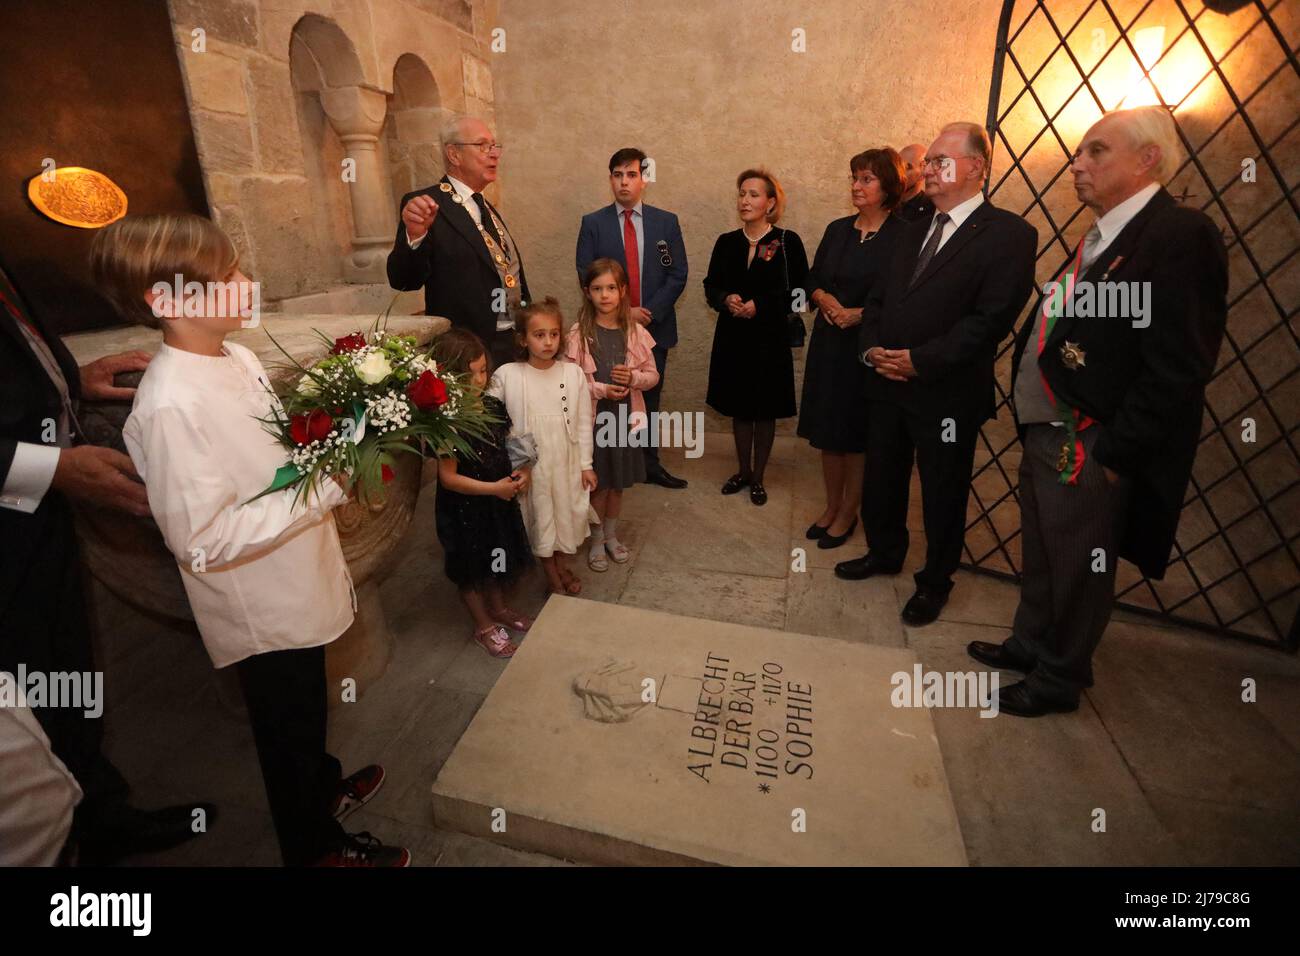 07 May 2022, Saxony-Anhalt, Ballenstedt: Eduard Prince of Anhalt stands with Saxony-Anhalt's Prime Minister Reiner Haseloff and family members in the tomb of Albrecht the Bear. Eduard von Anhalt celebrates his 80th birthday in Ballenstedt. At the same time the investiture took place. Within the scope of the Investiture, persons are honored annually for special achievements by the Ascanian House Order 'Albrecht the Bear'. The investiture takes place in the presence of Eduard Prince of Anhalt. Photo: Matthias Bein/dpa-Zentralbild/ZB Stock Photo